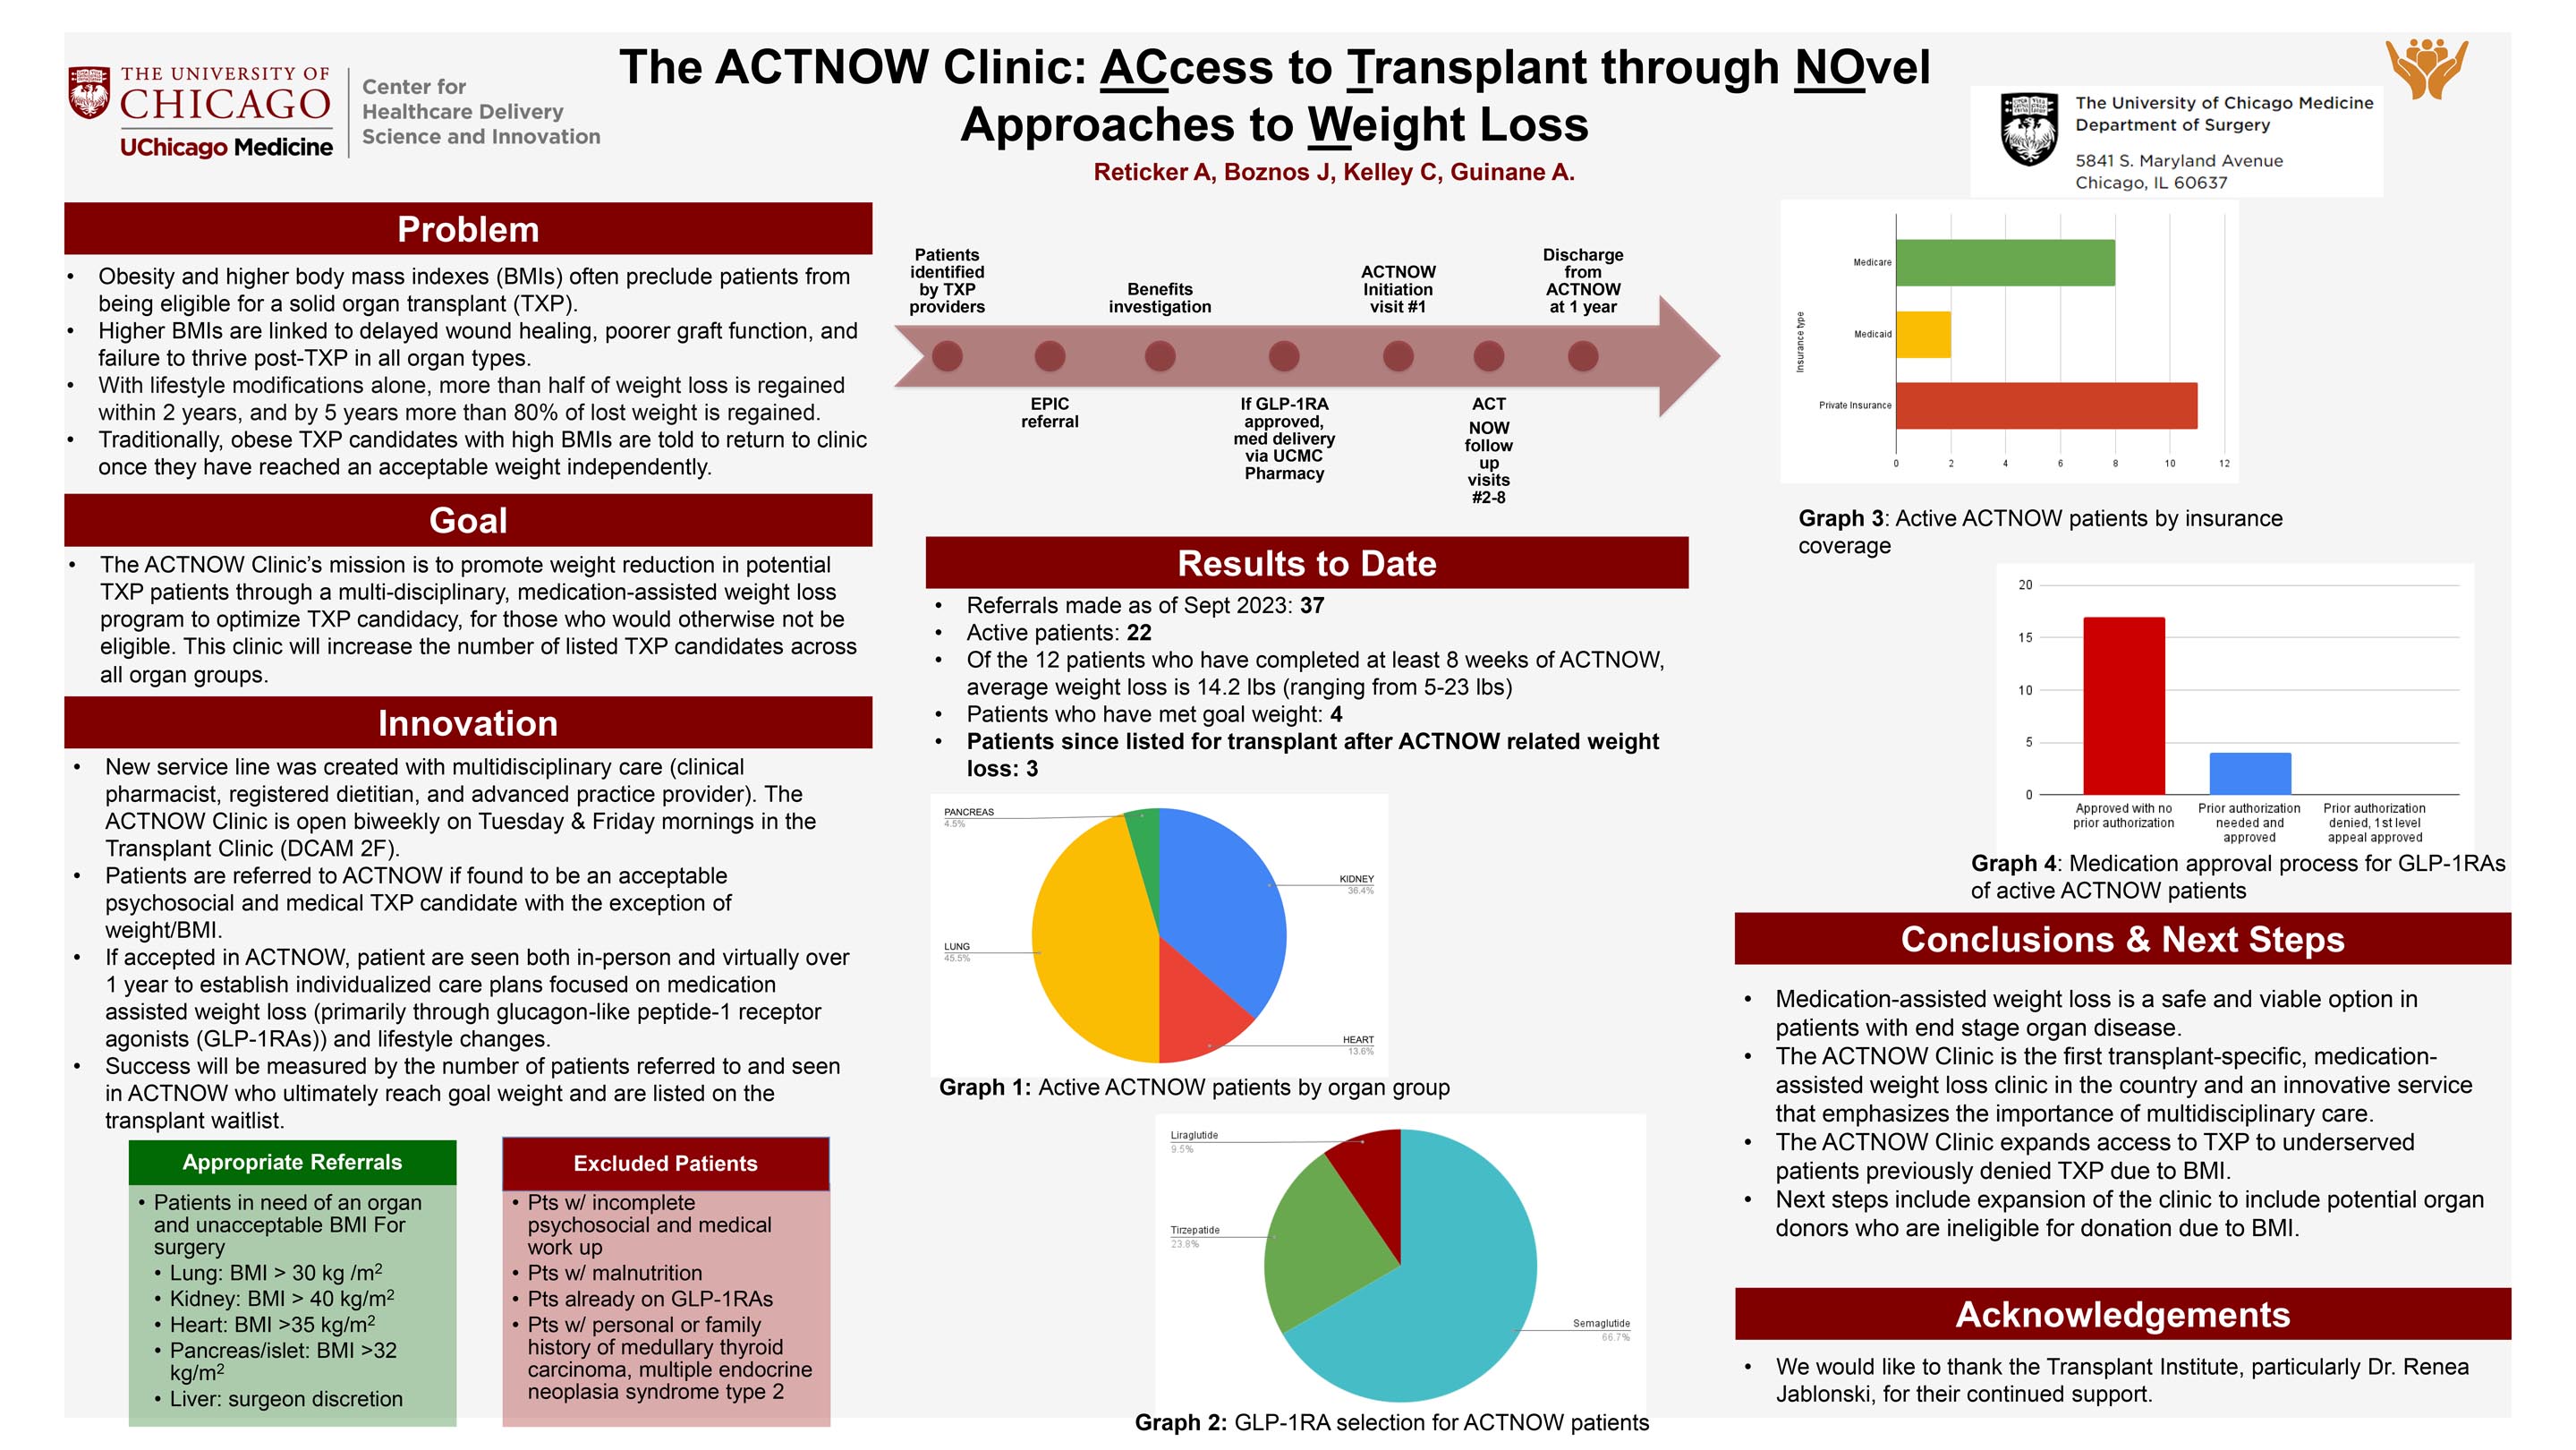 GUINANE_The ACTNOW Clinic- ACcess to Transplant through NOvel Approaches to Weight Loss